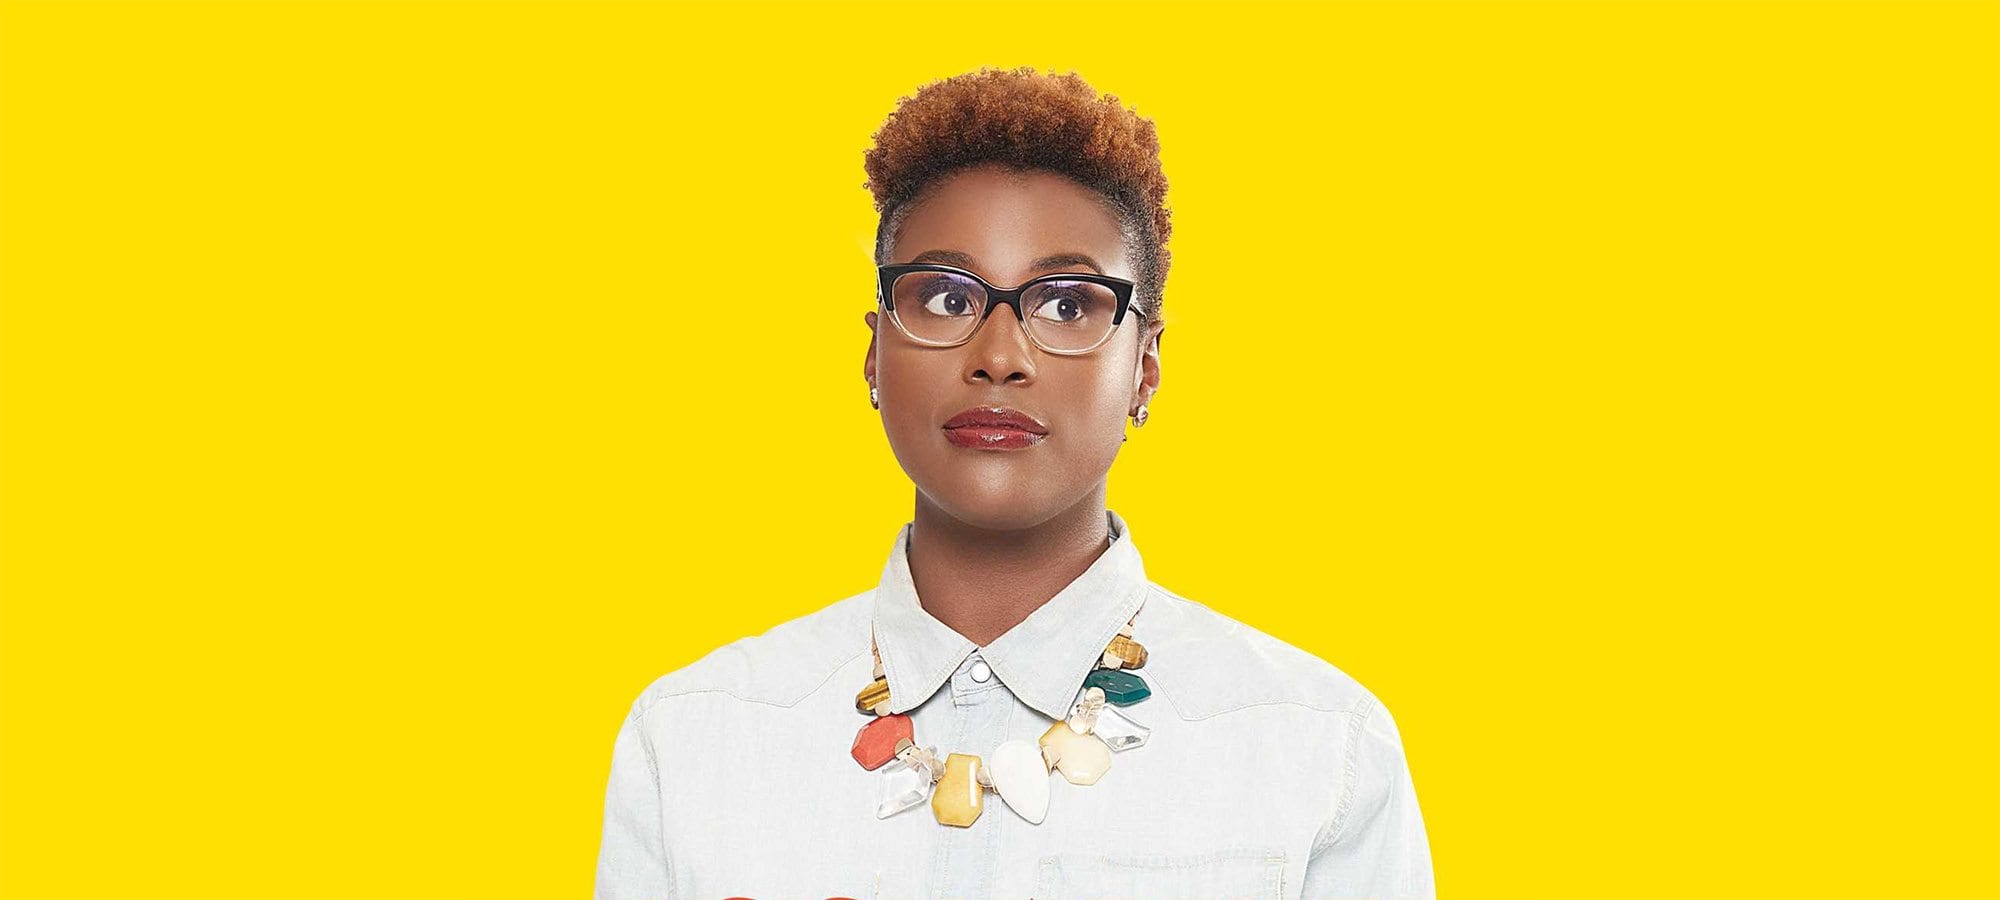 To celebrate Issa’s long-awaited big screen breakout in 'Little', here’s our celebration of Miss Issa Rae and her least insecure moments.